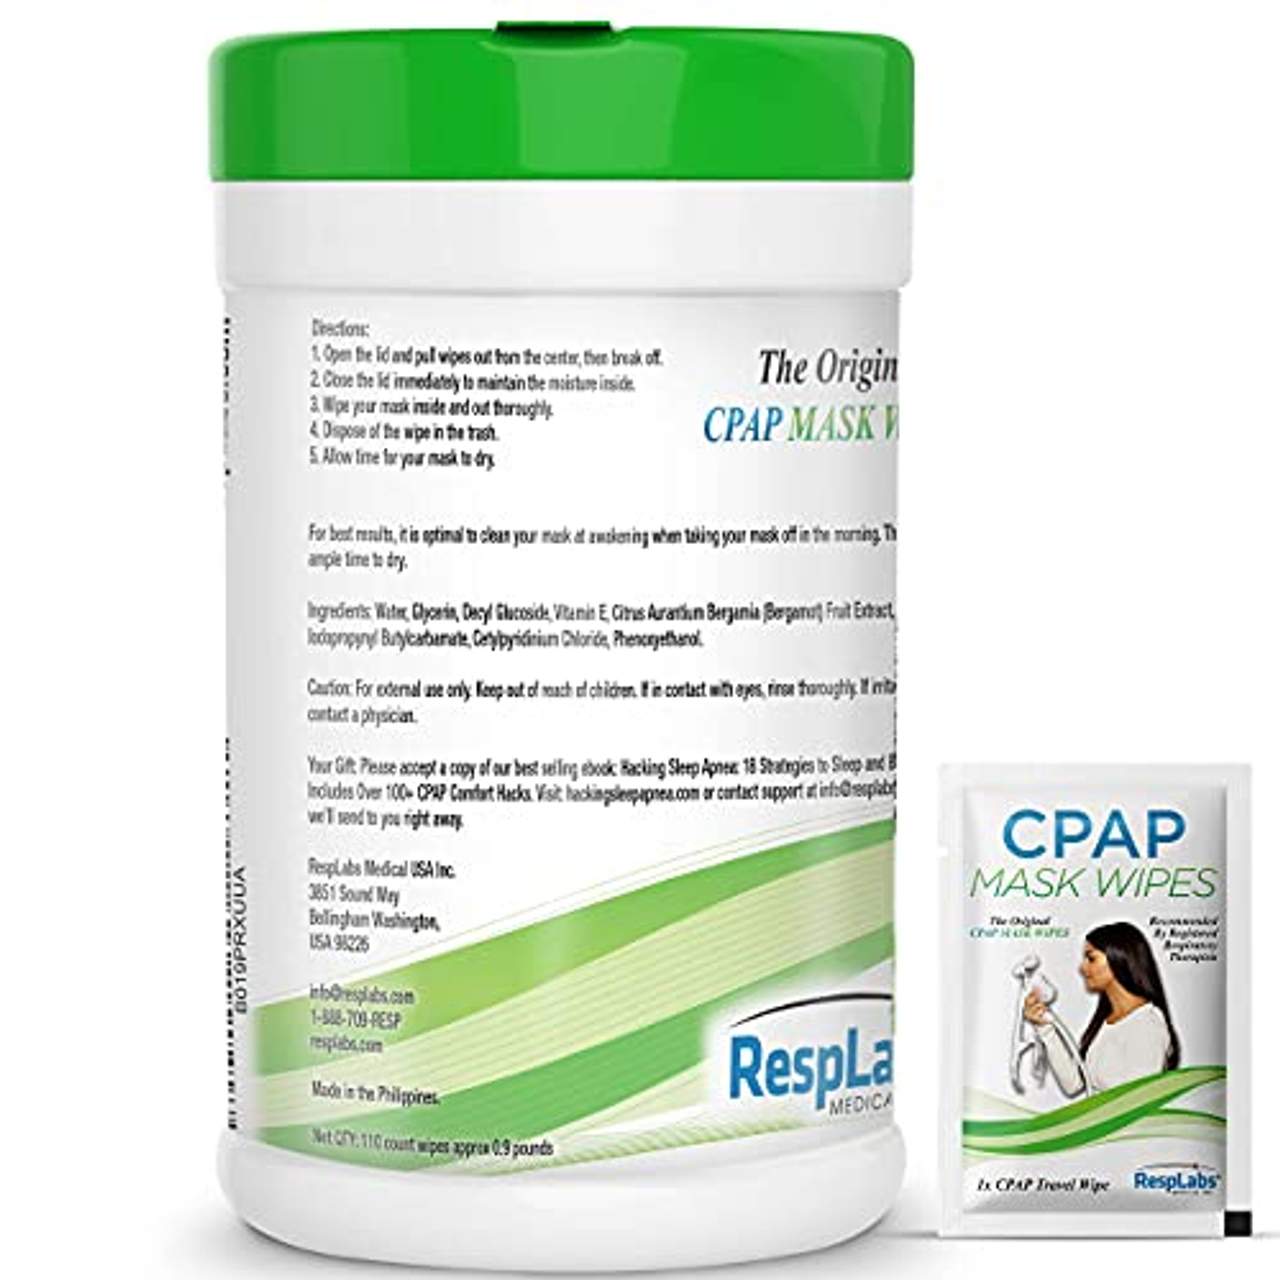 RespLabs Medical Cpap Mask Cleaning Wipes